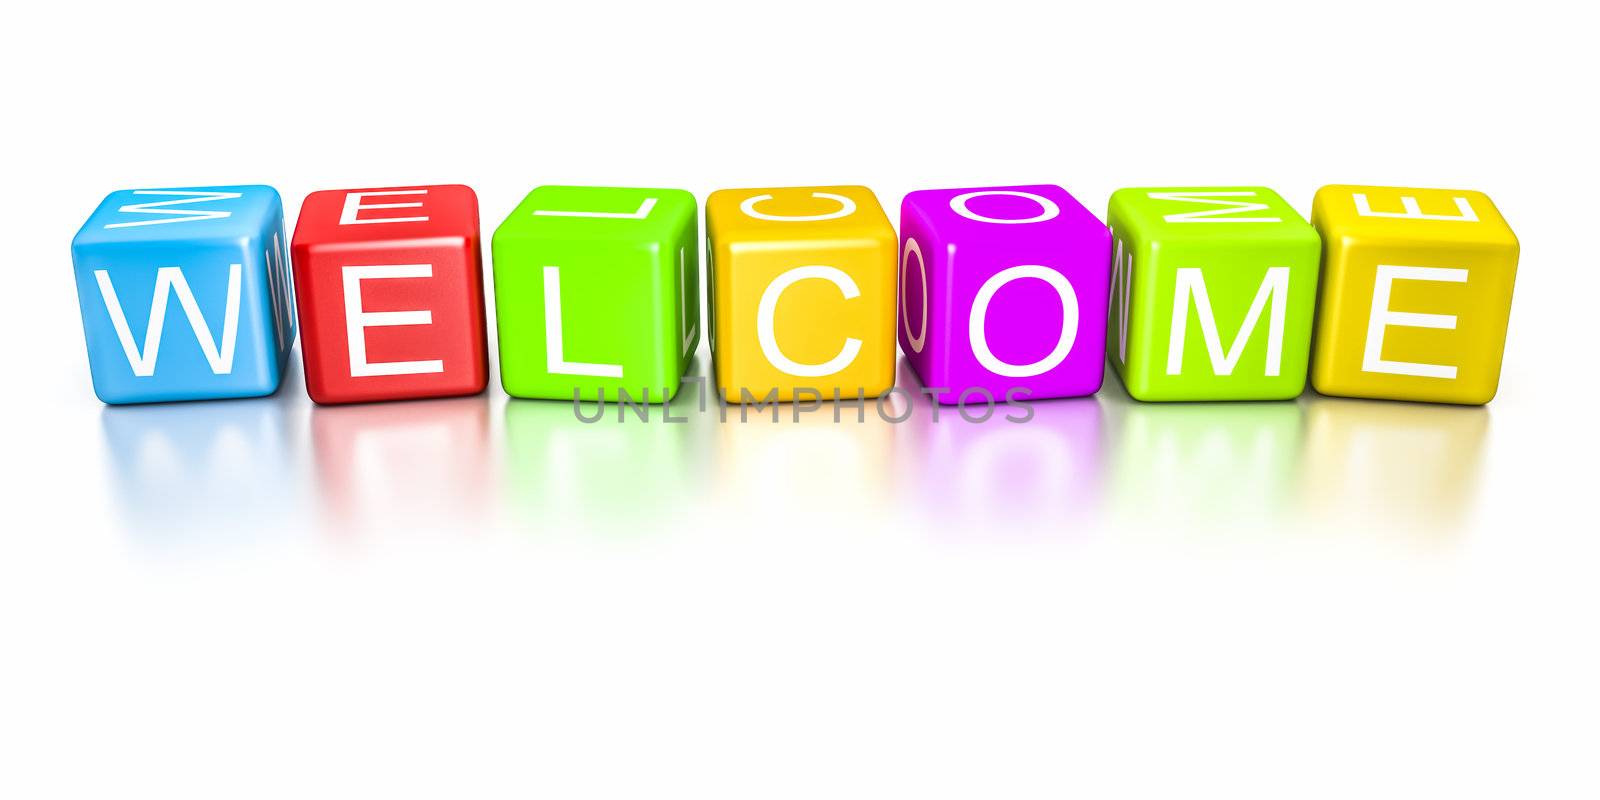 An image of a colorful welcome dice banner